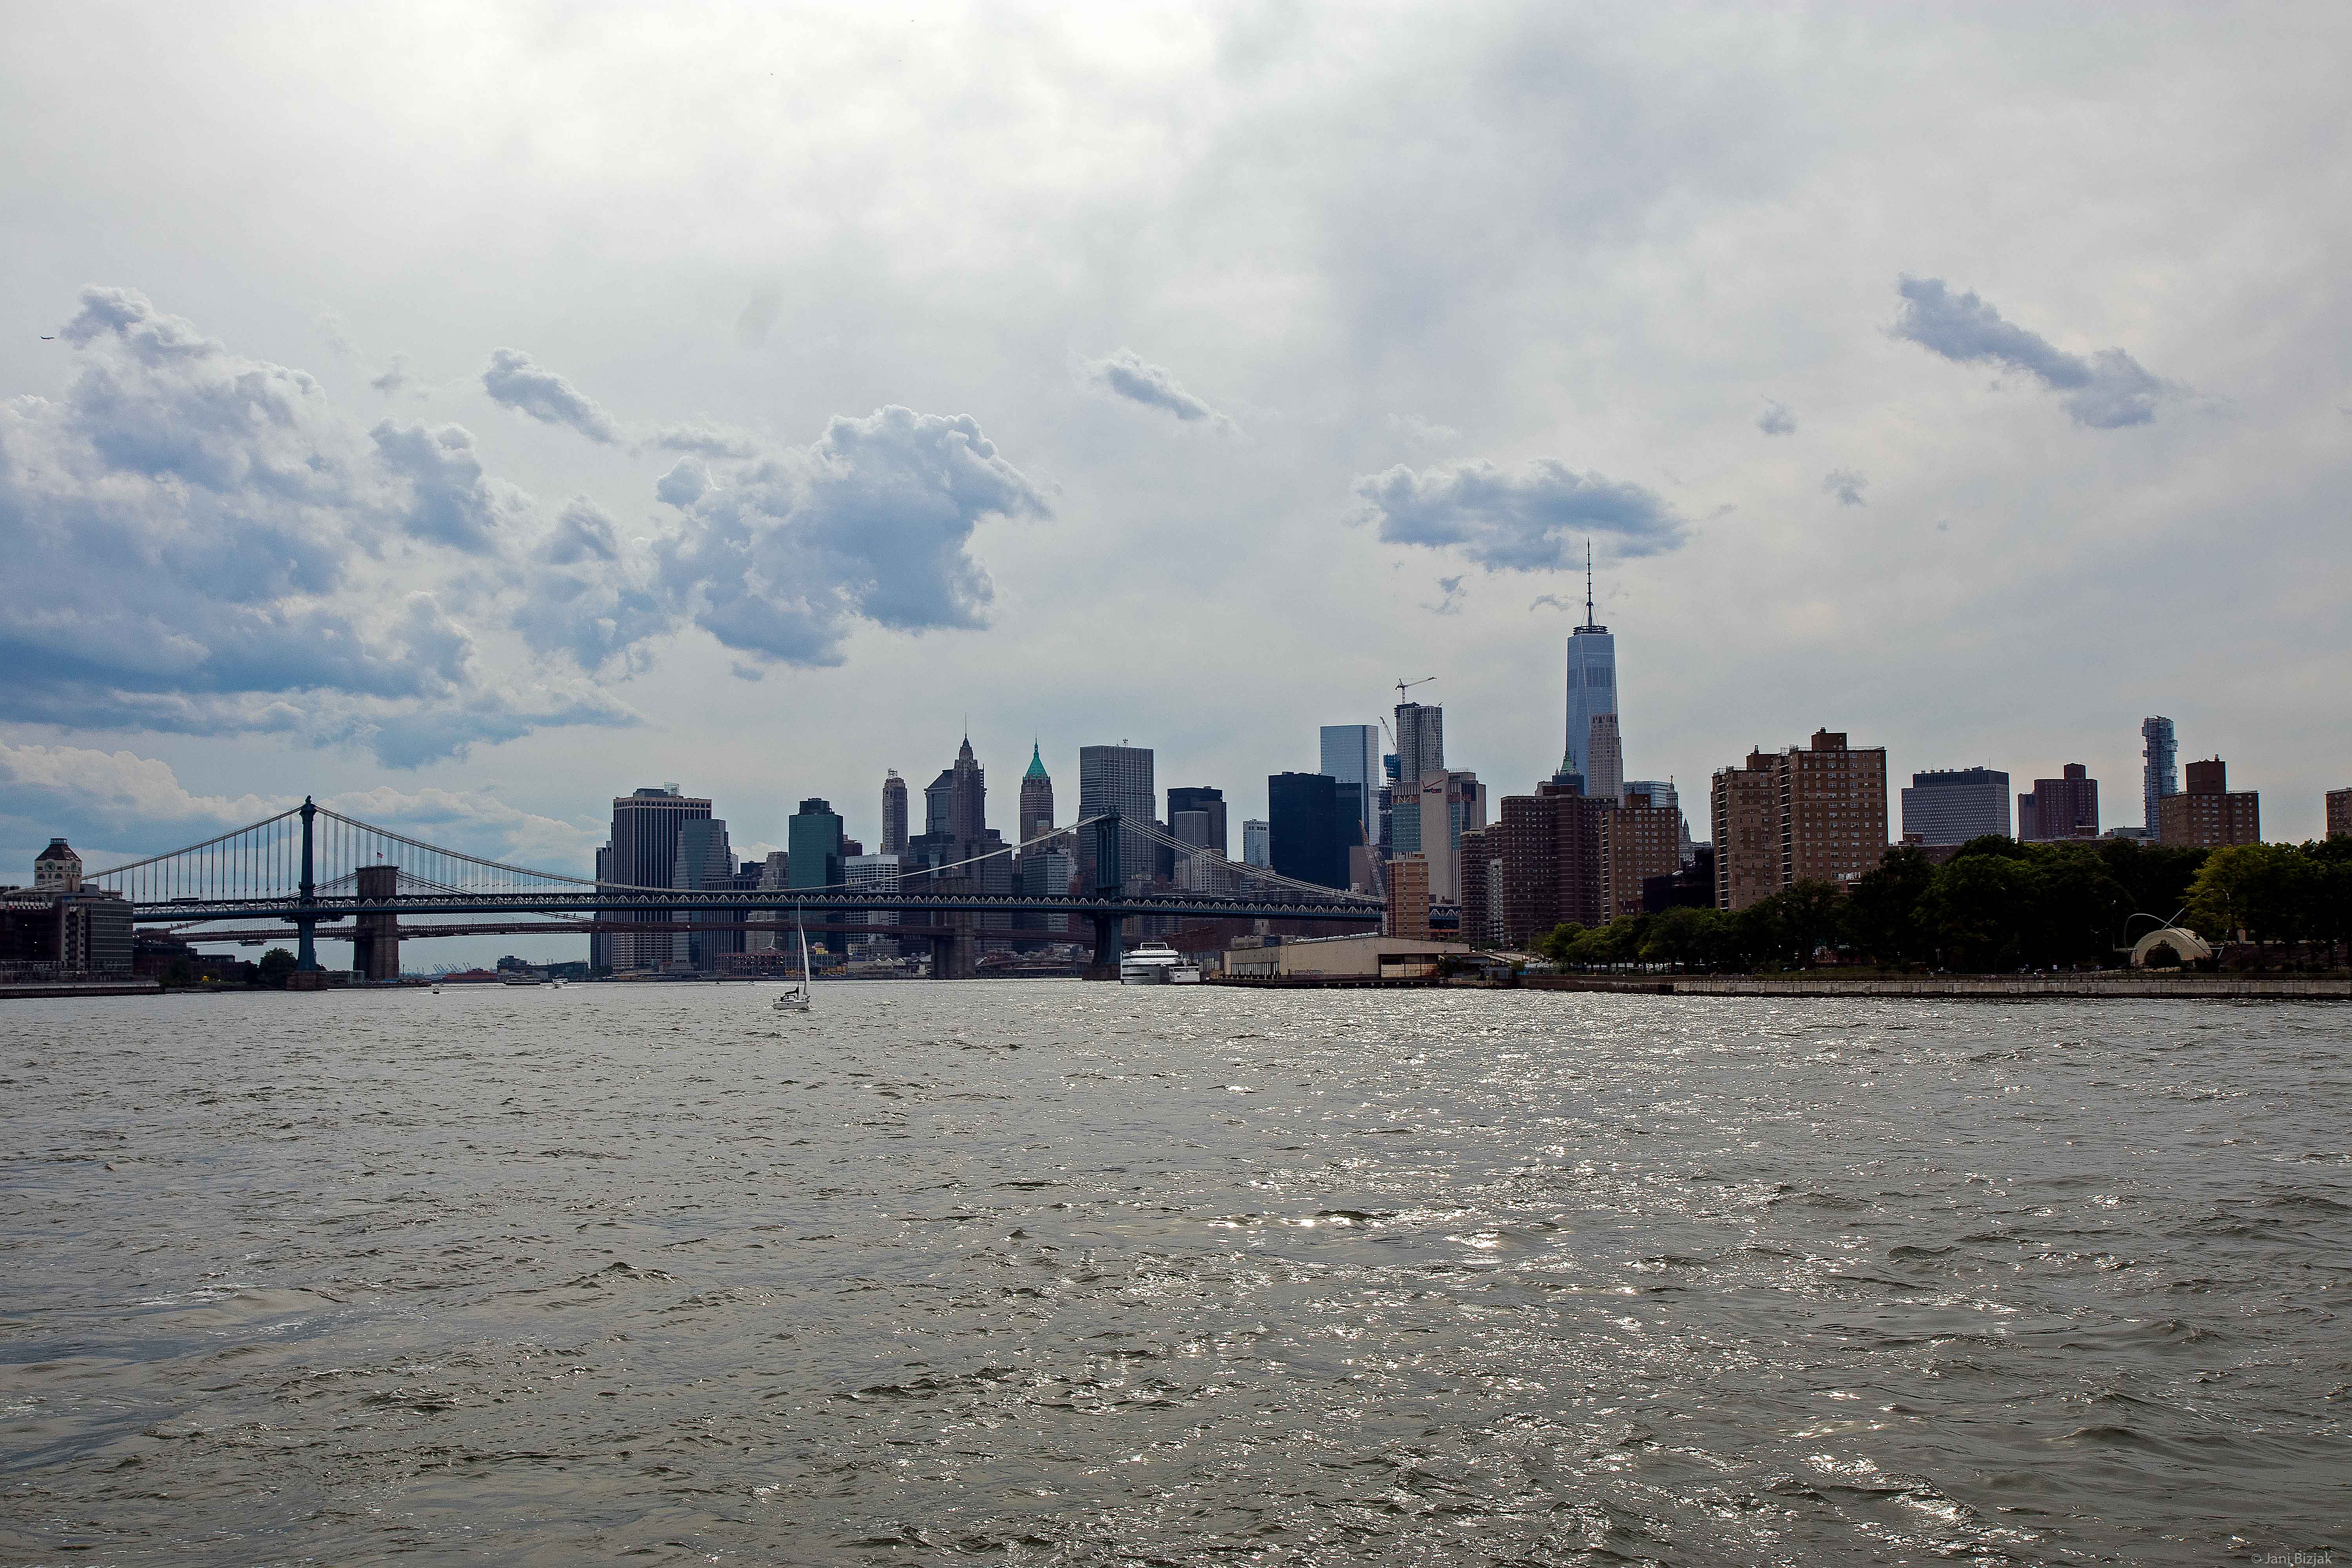 New York from the river